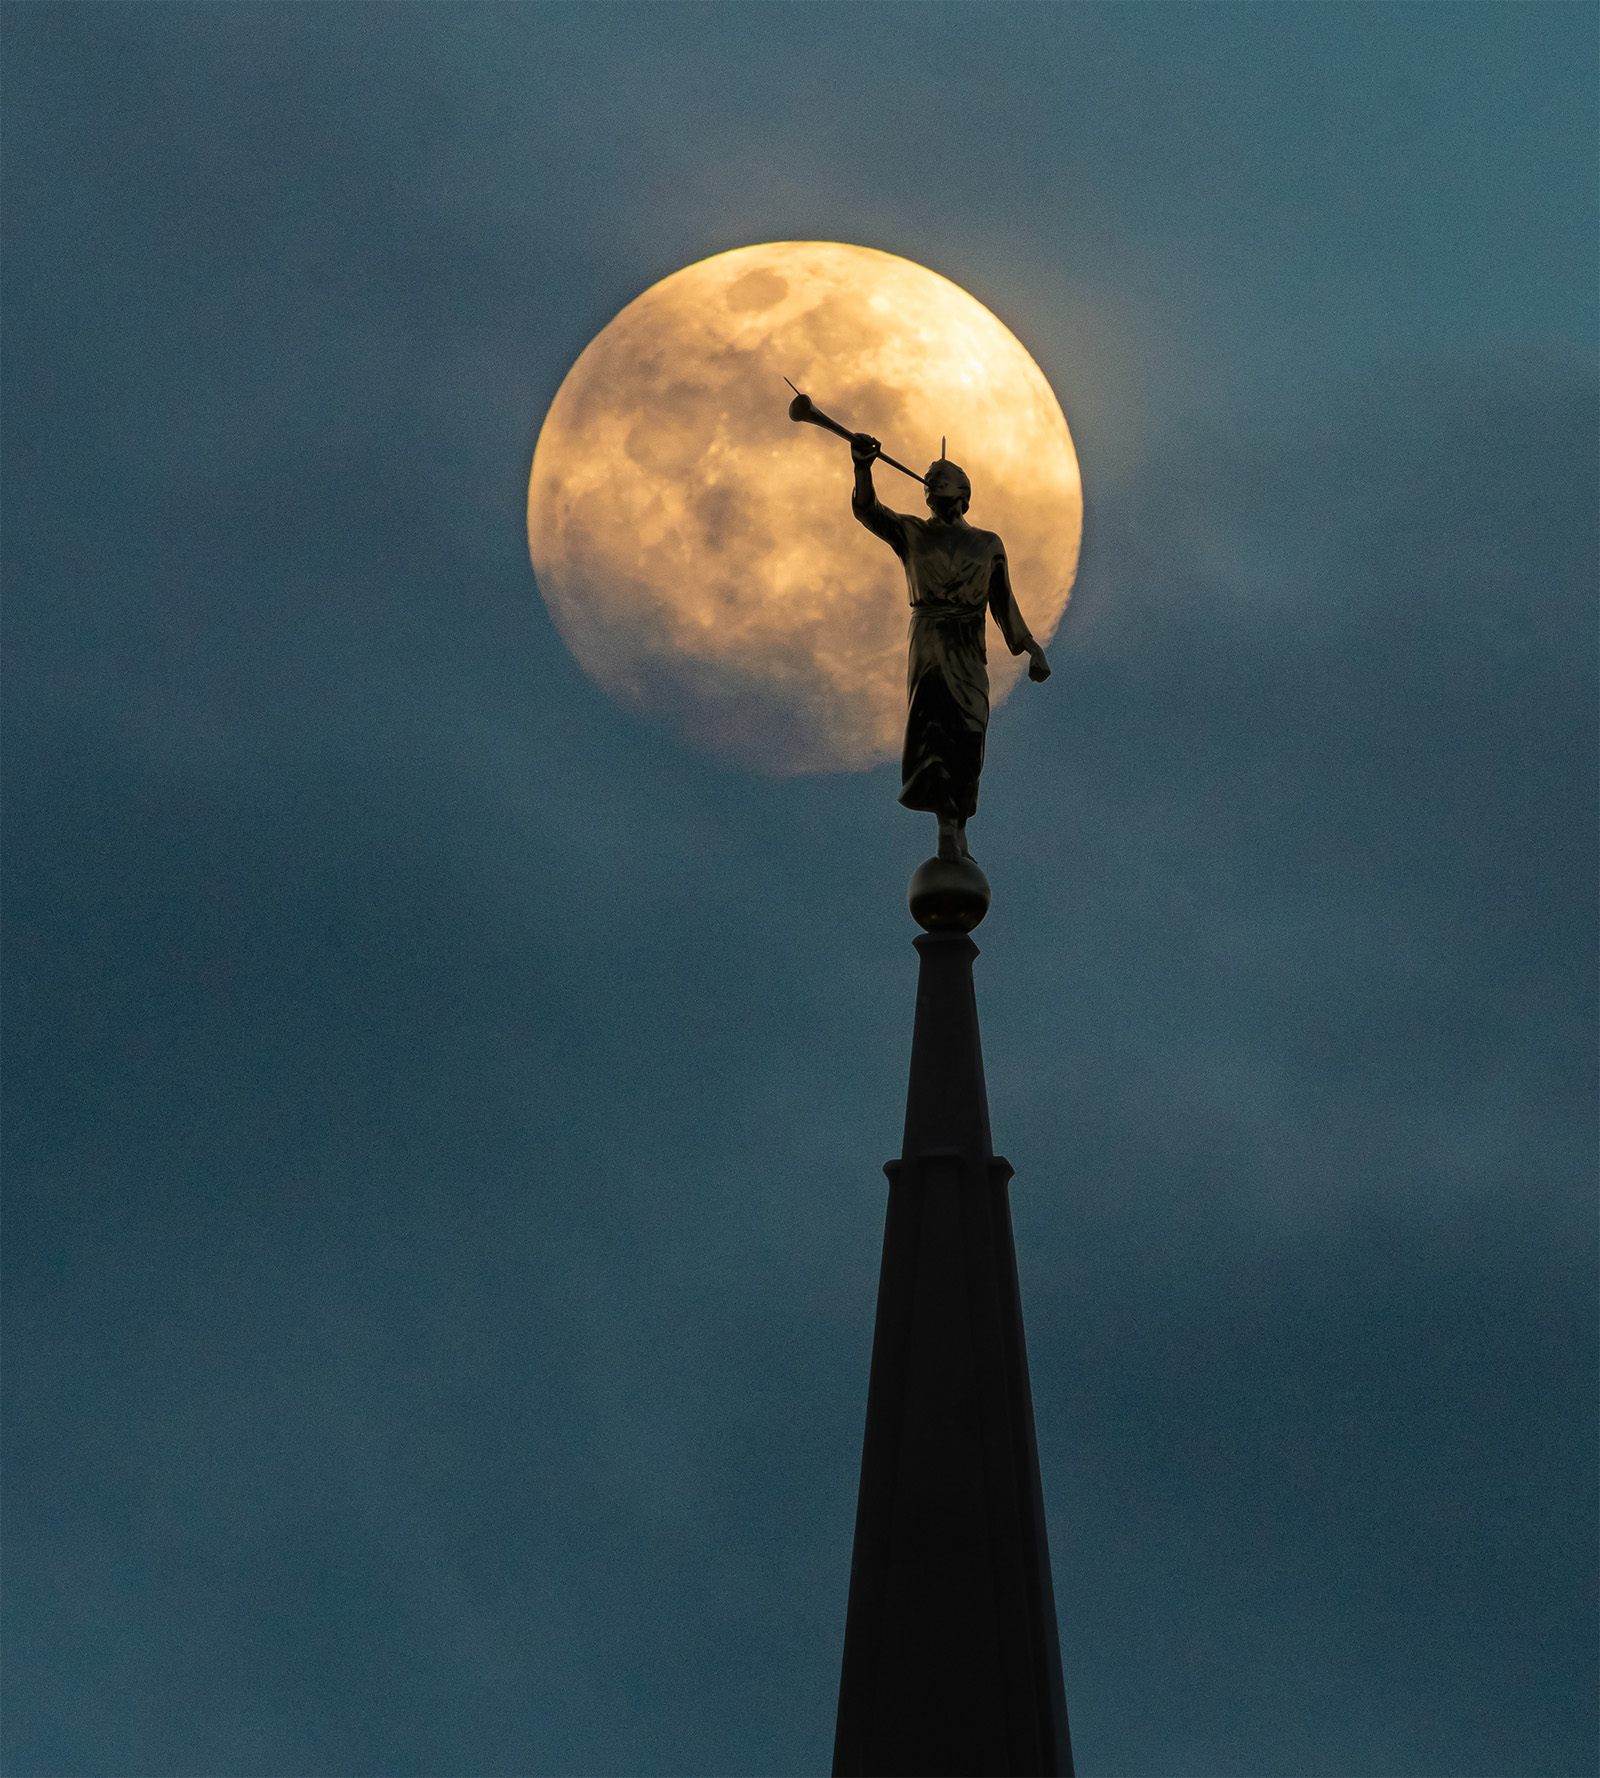 Moroni Blows His Trumpet by Larry Treadwell